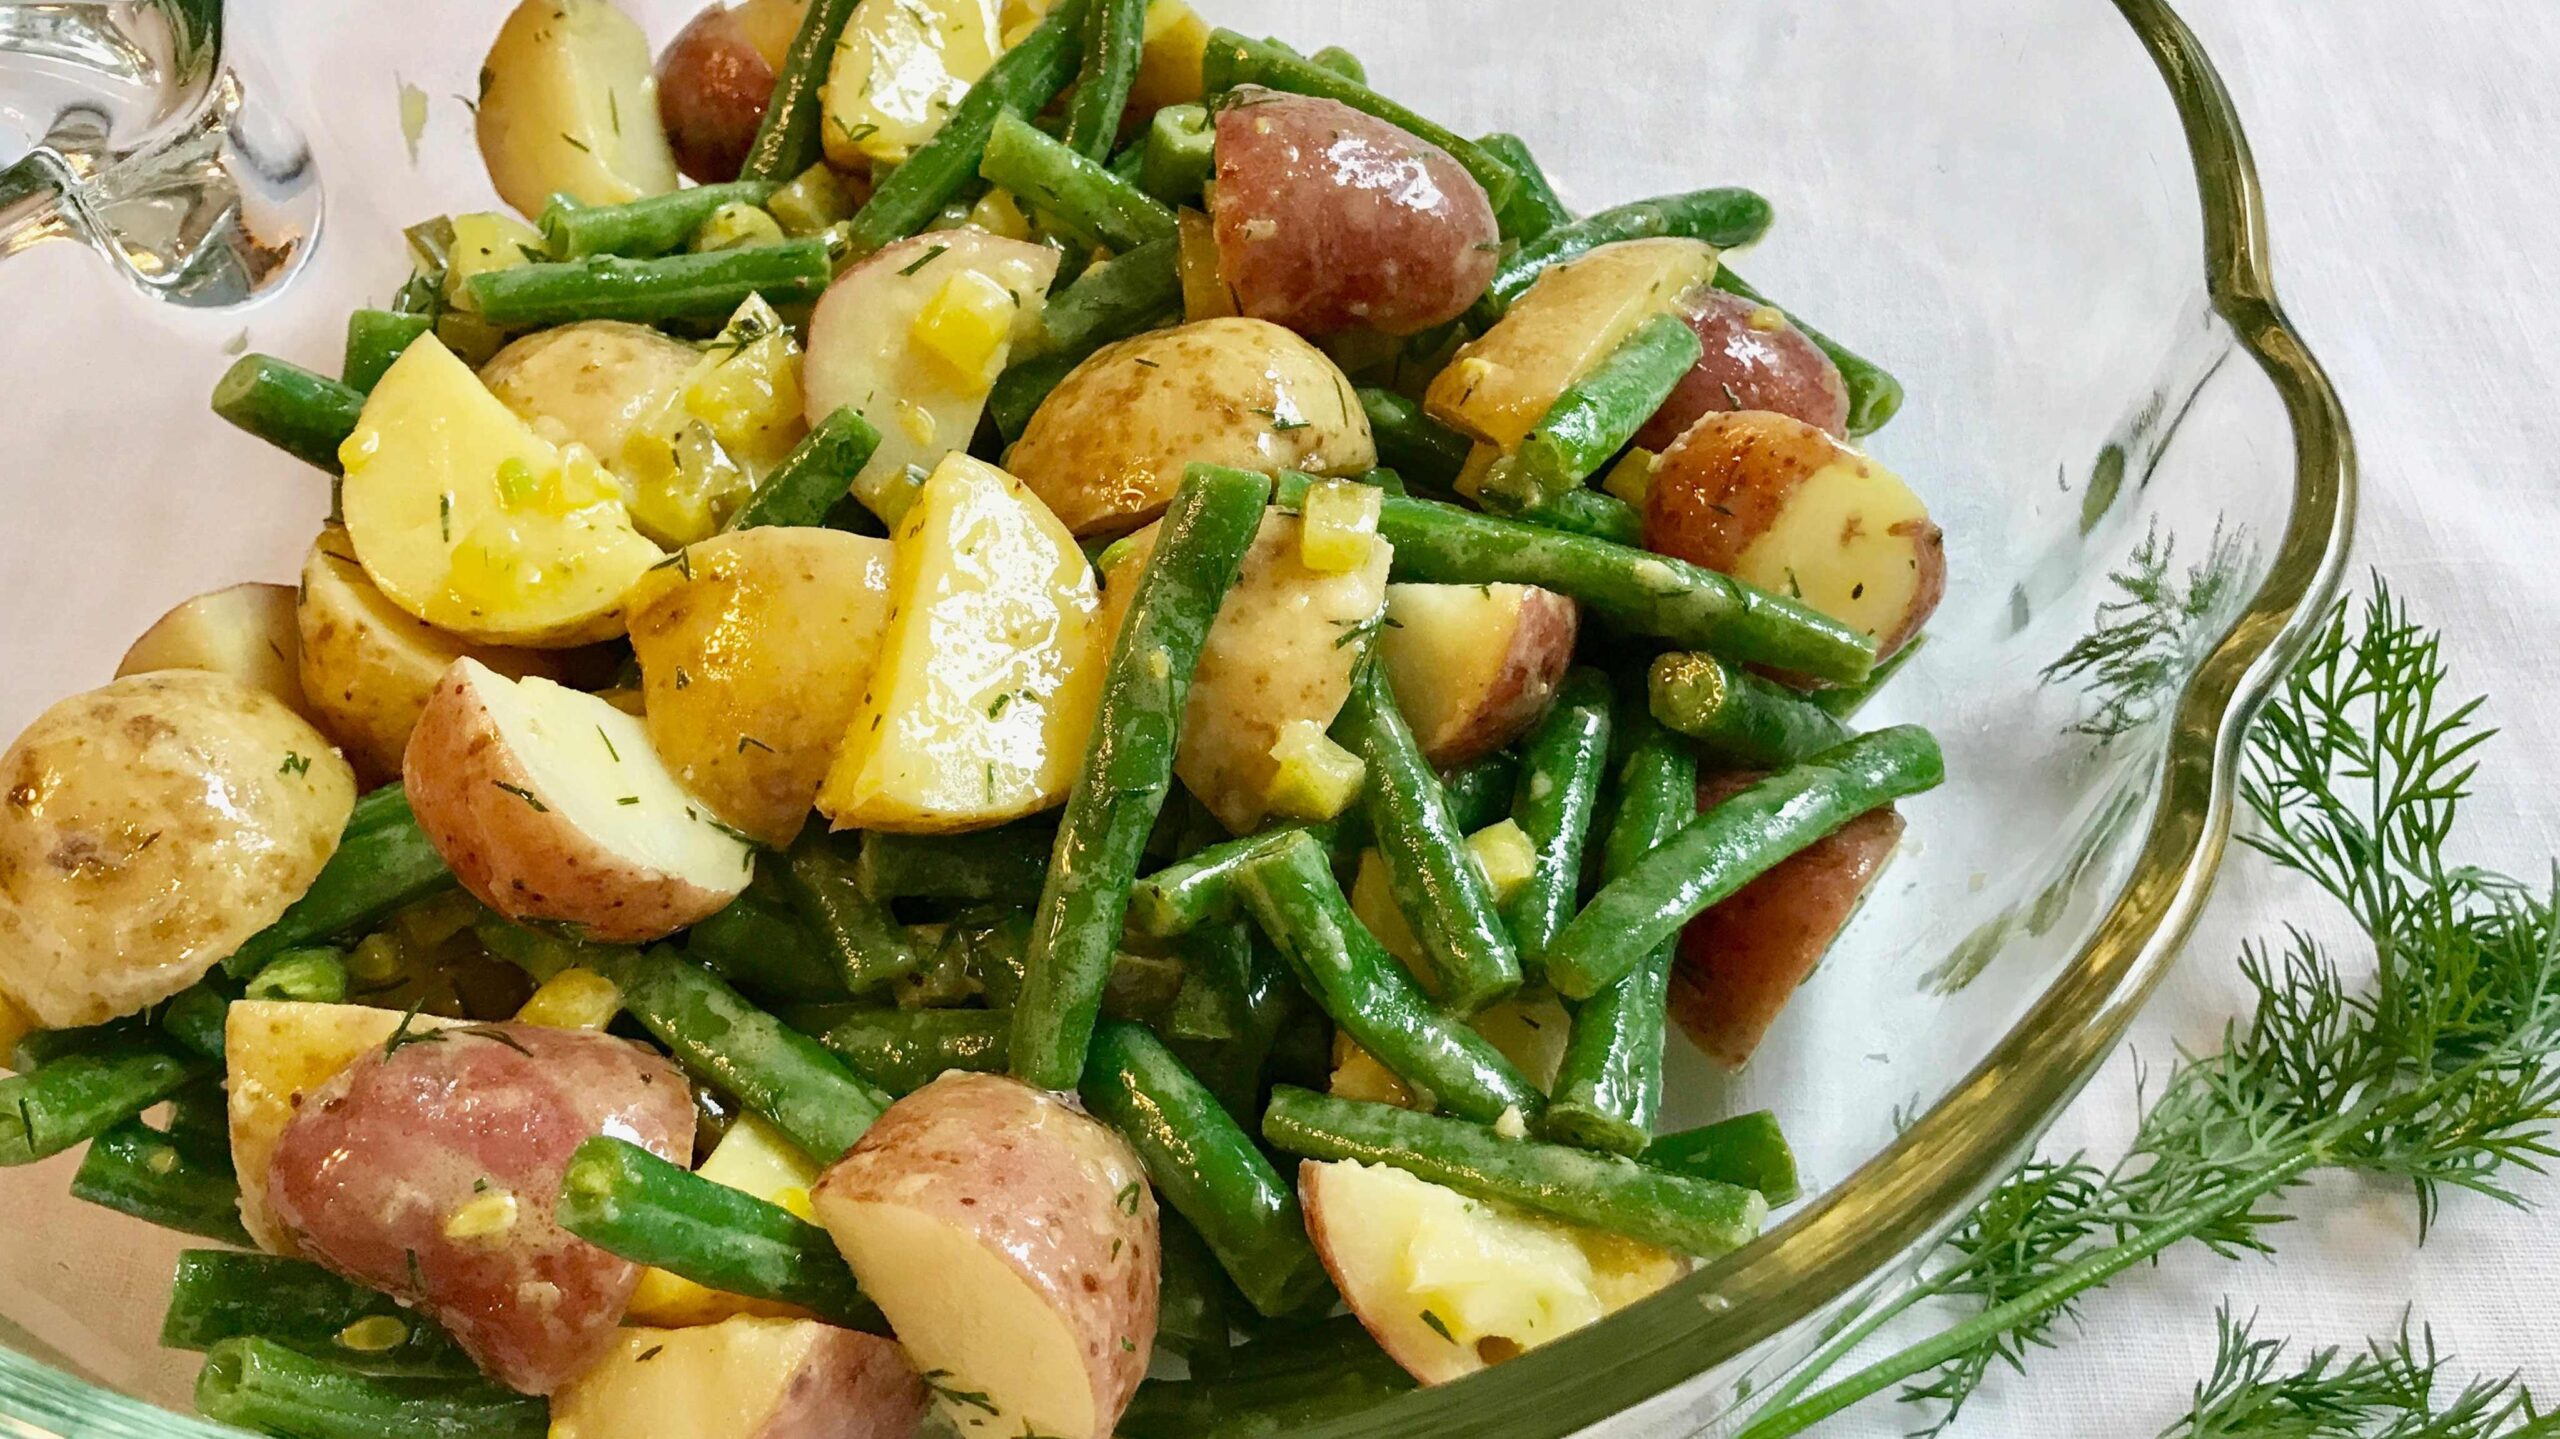  My recipe for potato salad is a one-of-a-kind treat!